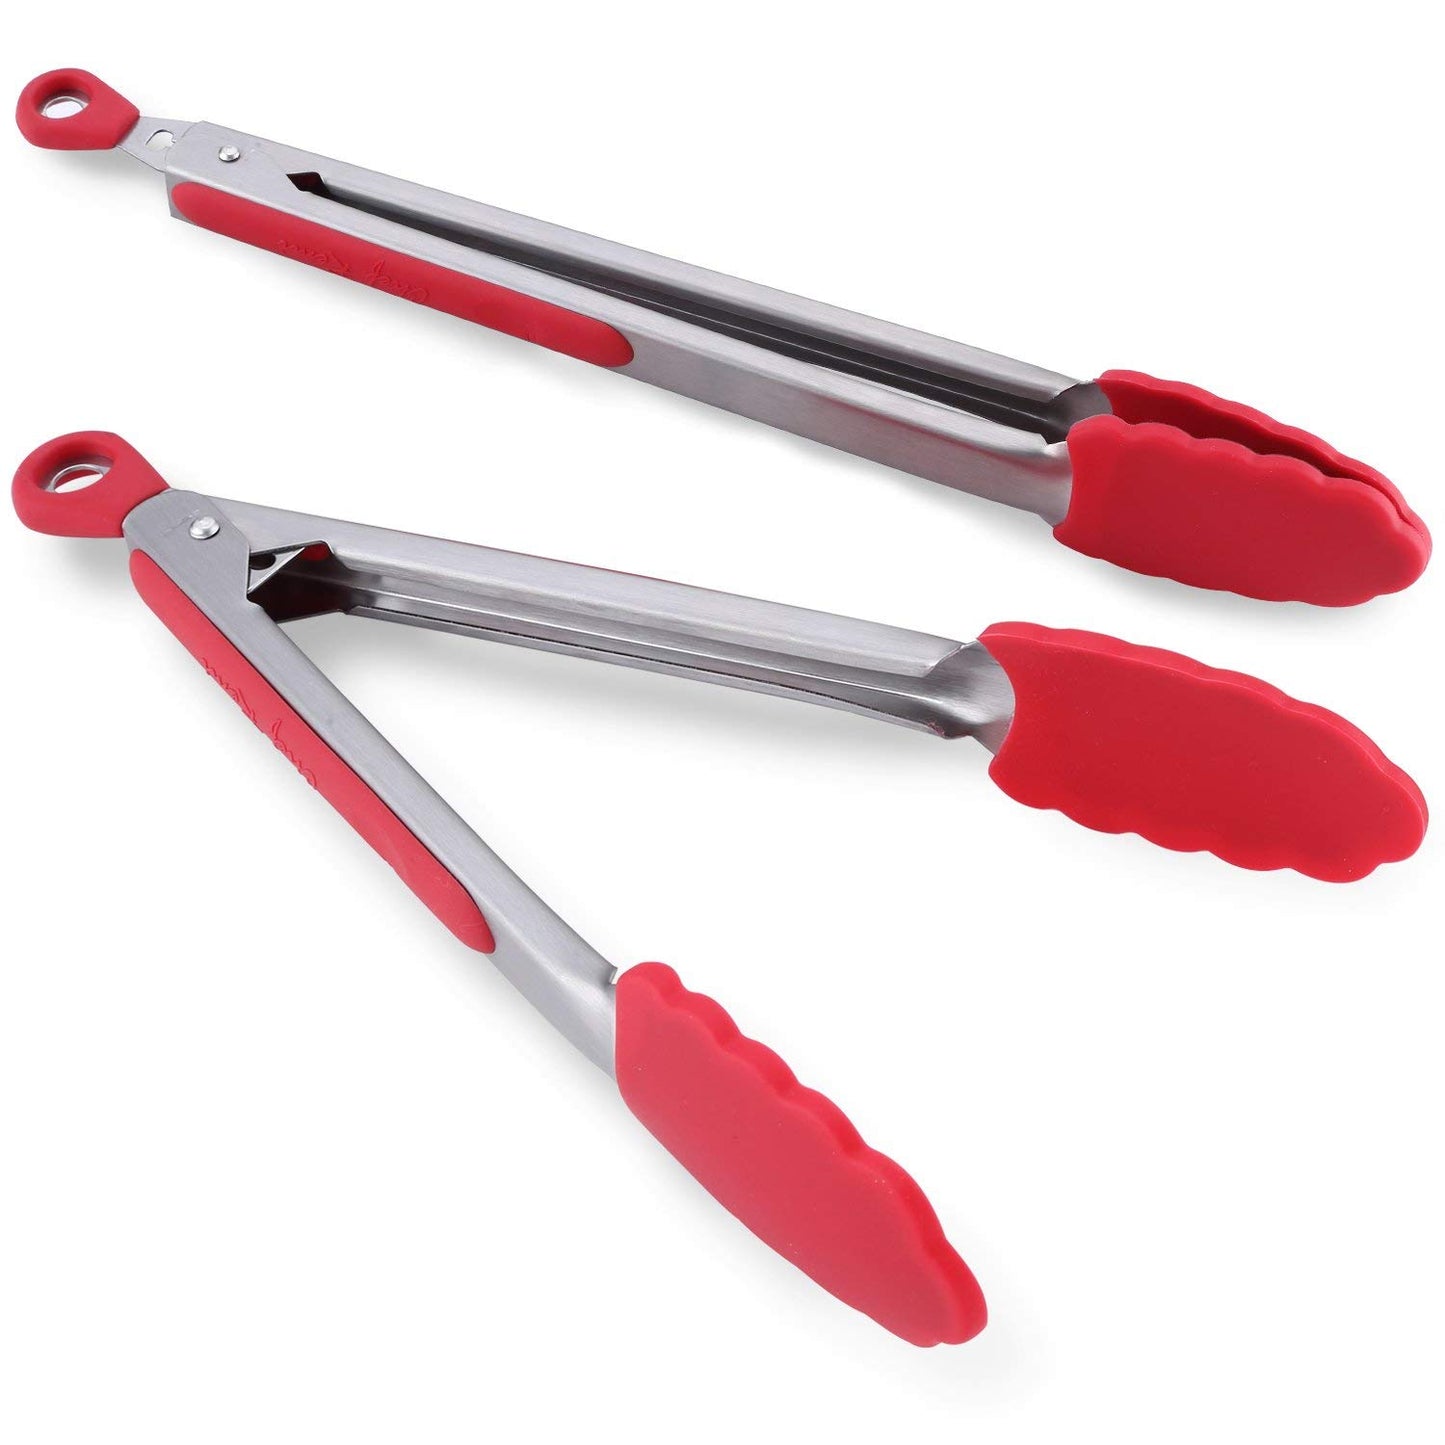 2pc Kitchen Tongs Set Multipurpose Tong Set with Silicone Tips and Locking Clips